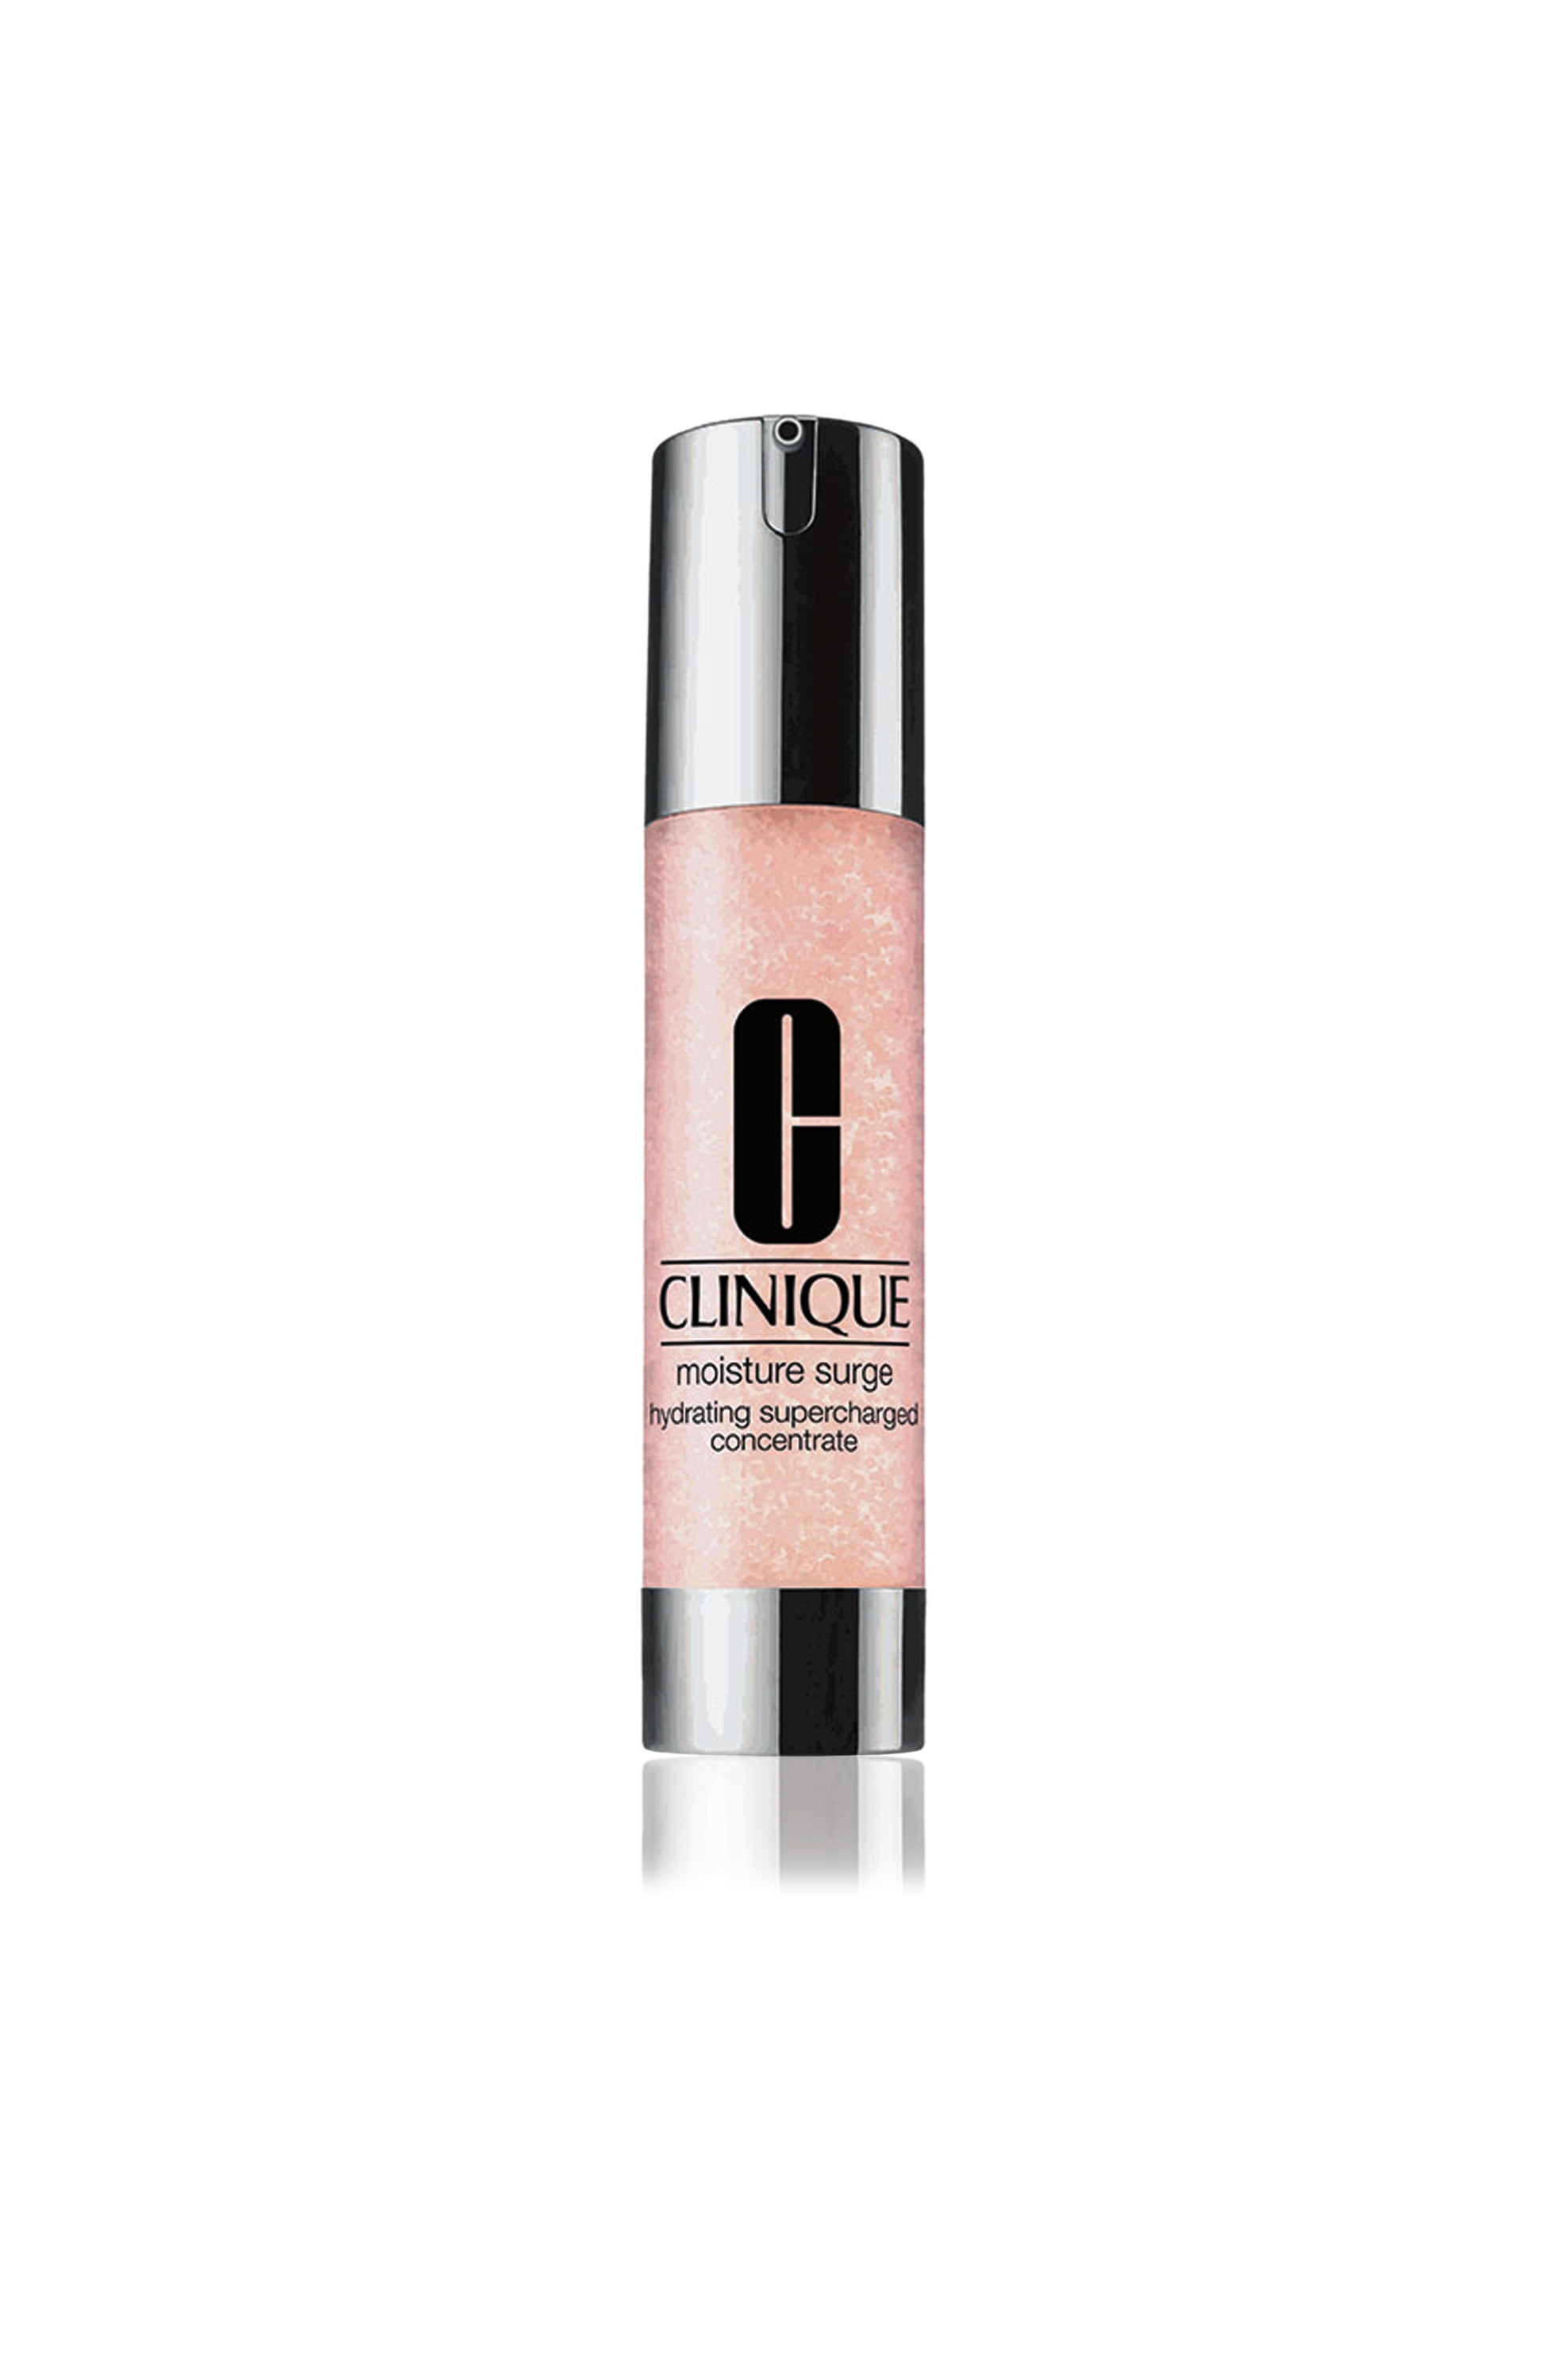 Clinique Moisture Surge™ Hydrating Supercharged Concentrate 48 ml - ZY0R010000 979207501499